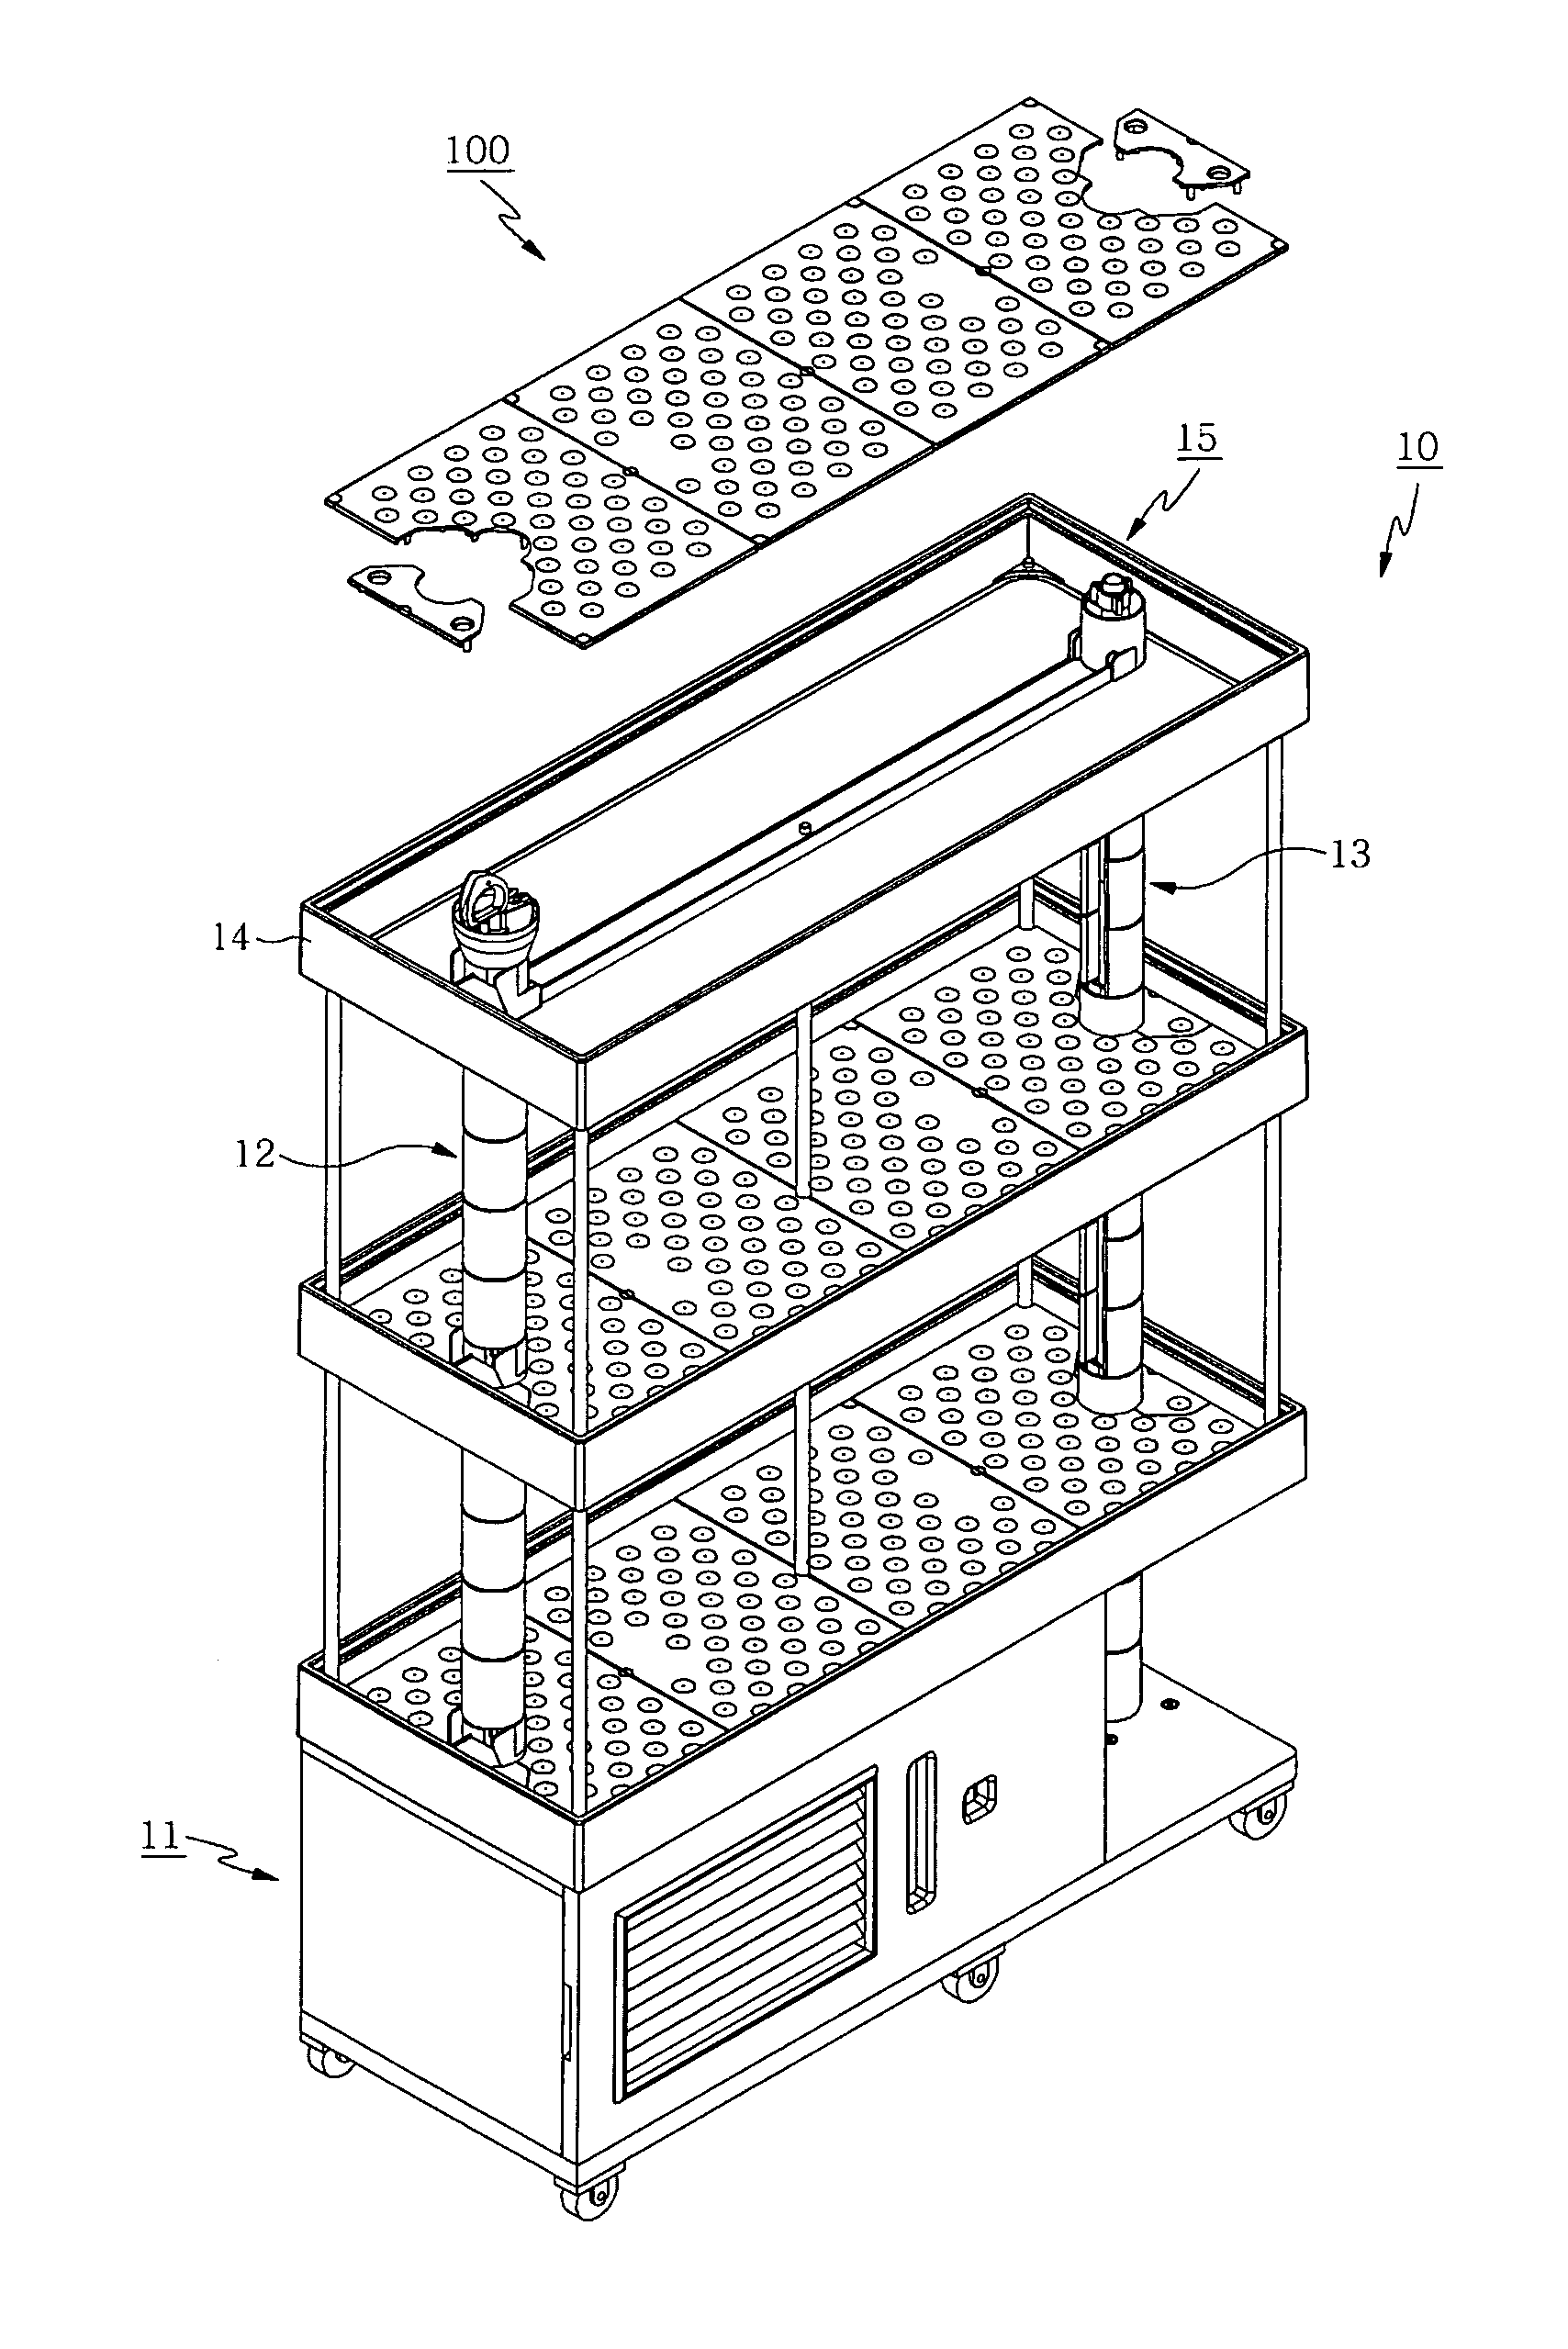 Supporting device having capability to relocate the flowerpots